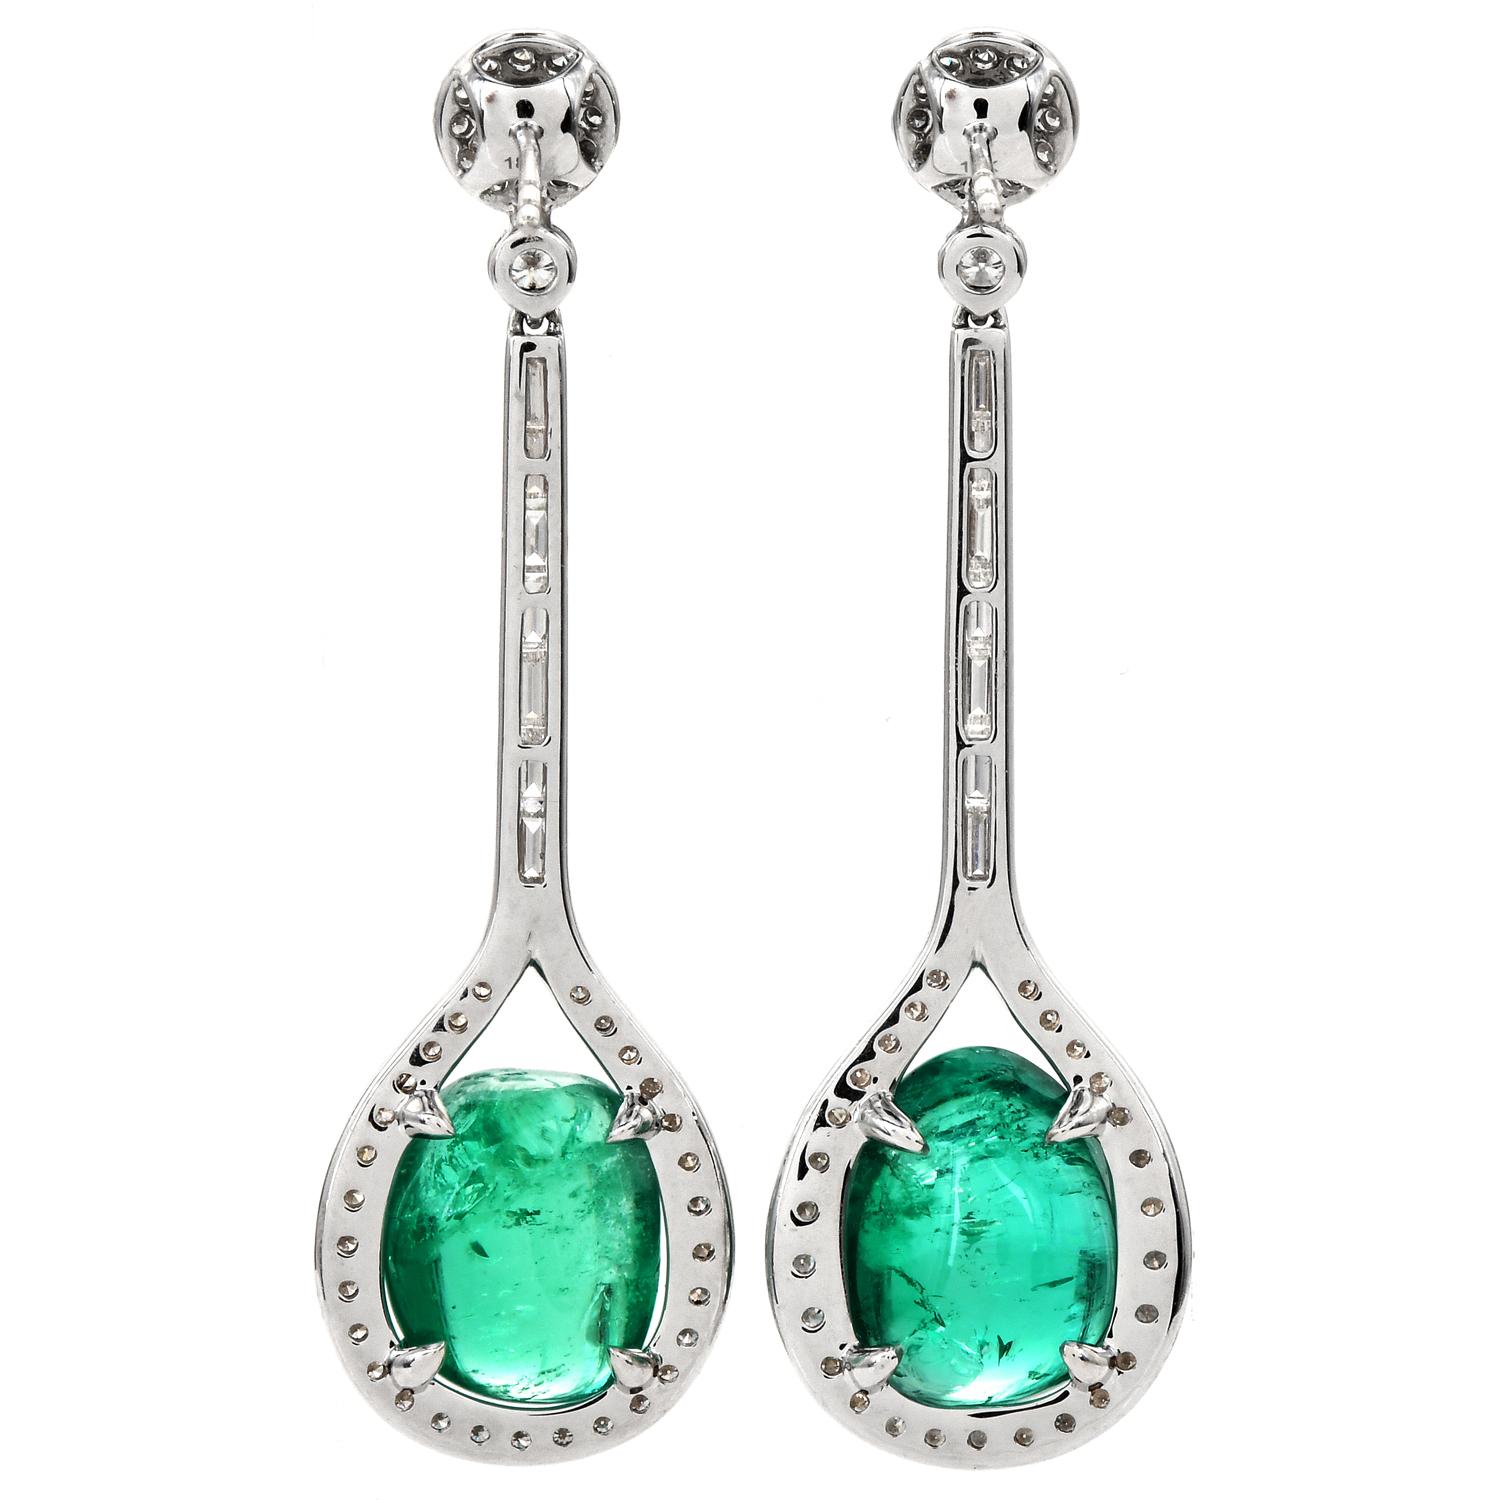 Stand out with these Emerald Gold Cabochon Drop Dangle Earrings.  These earrings are crafted in 18-karat white gold. 

There are two genuine double cabochons emeralds, weighing

approximately 19.63 in total carats

There are glittering With some